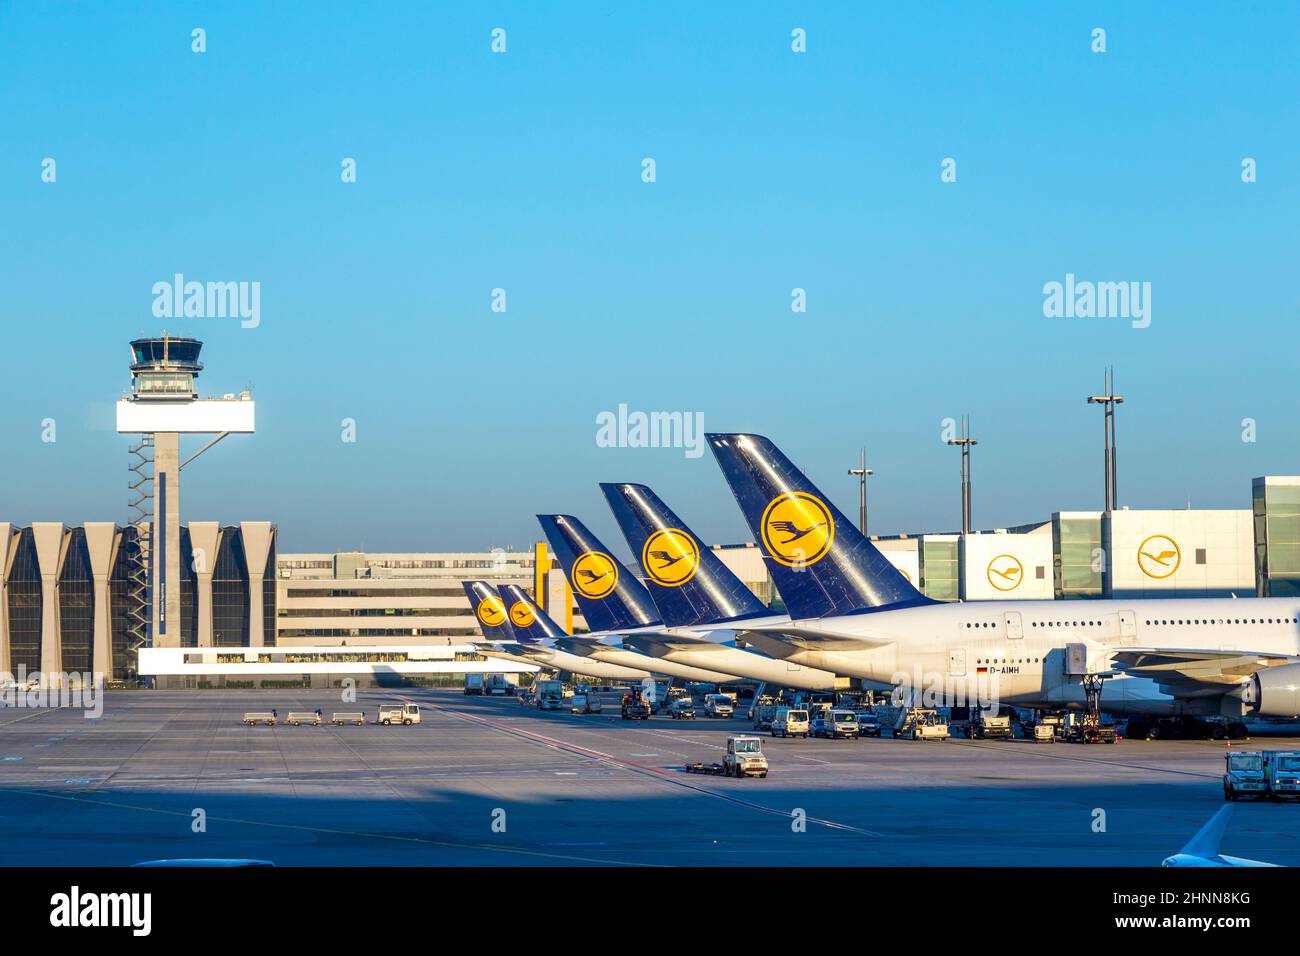 Lufthansa fleet is grounded due to corona crises. The picture symbolizes grounded aircrafts at the gate. Stock Photo